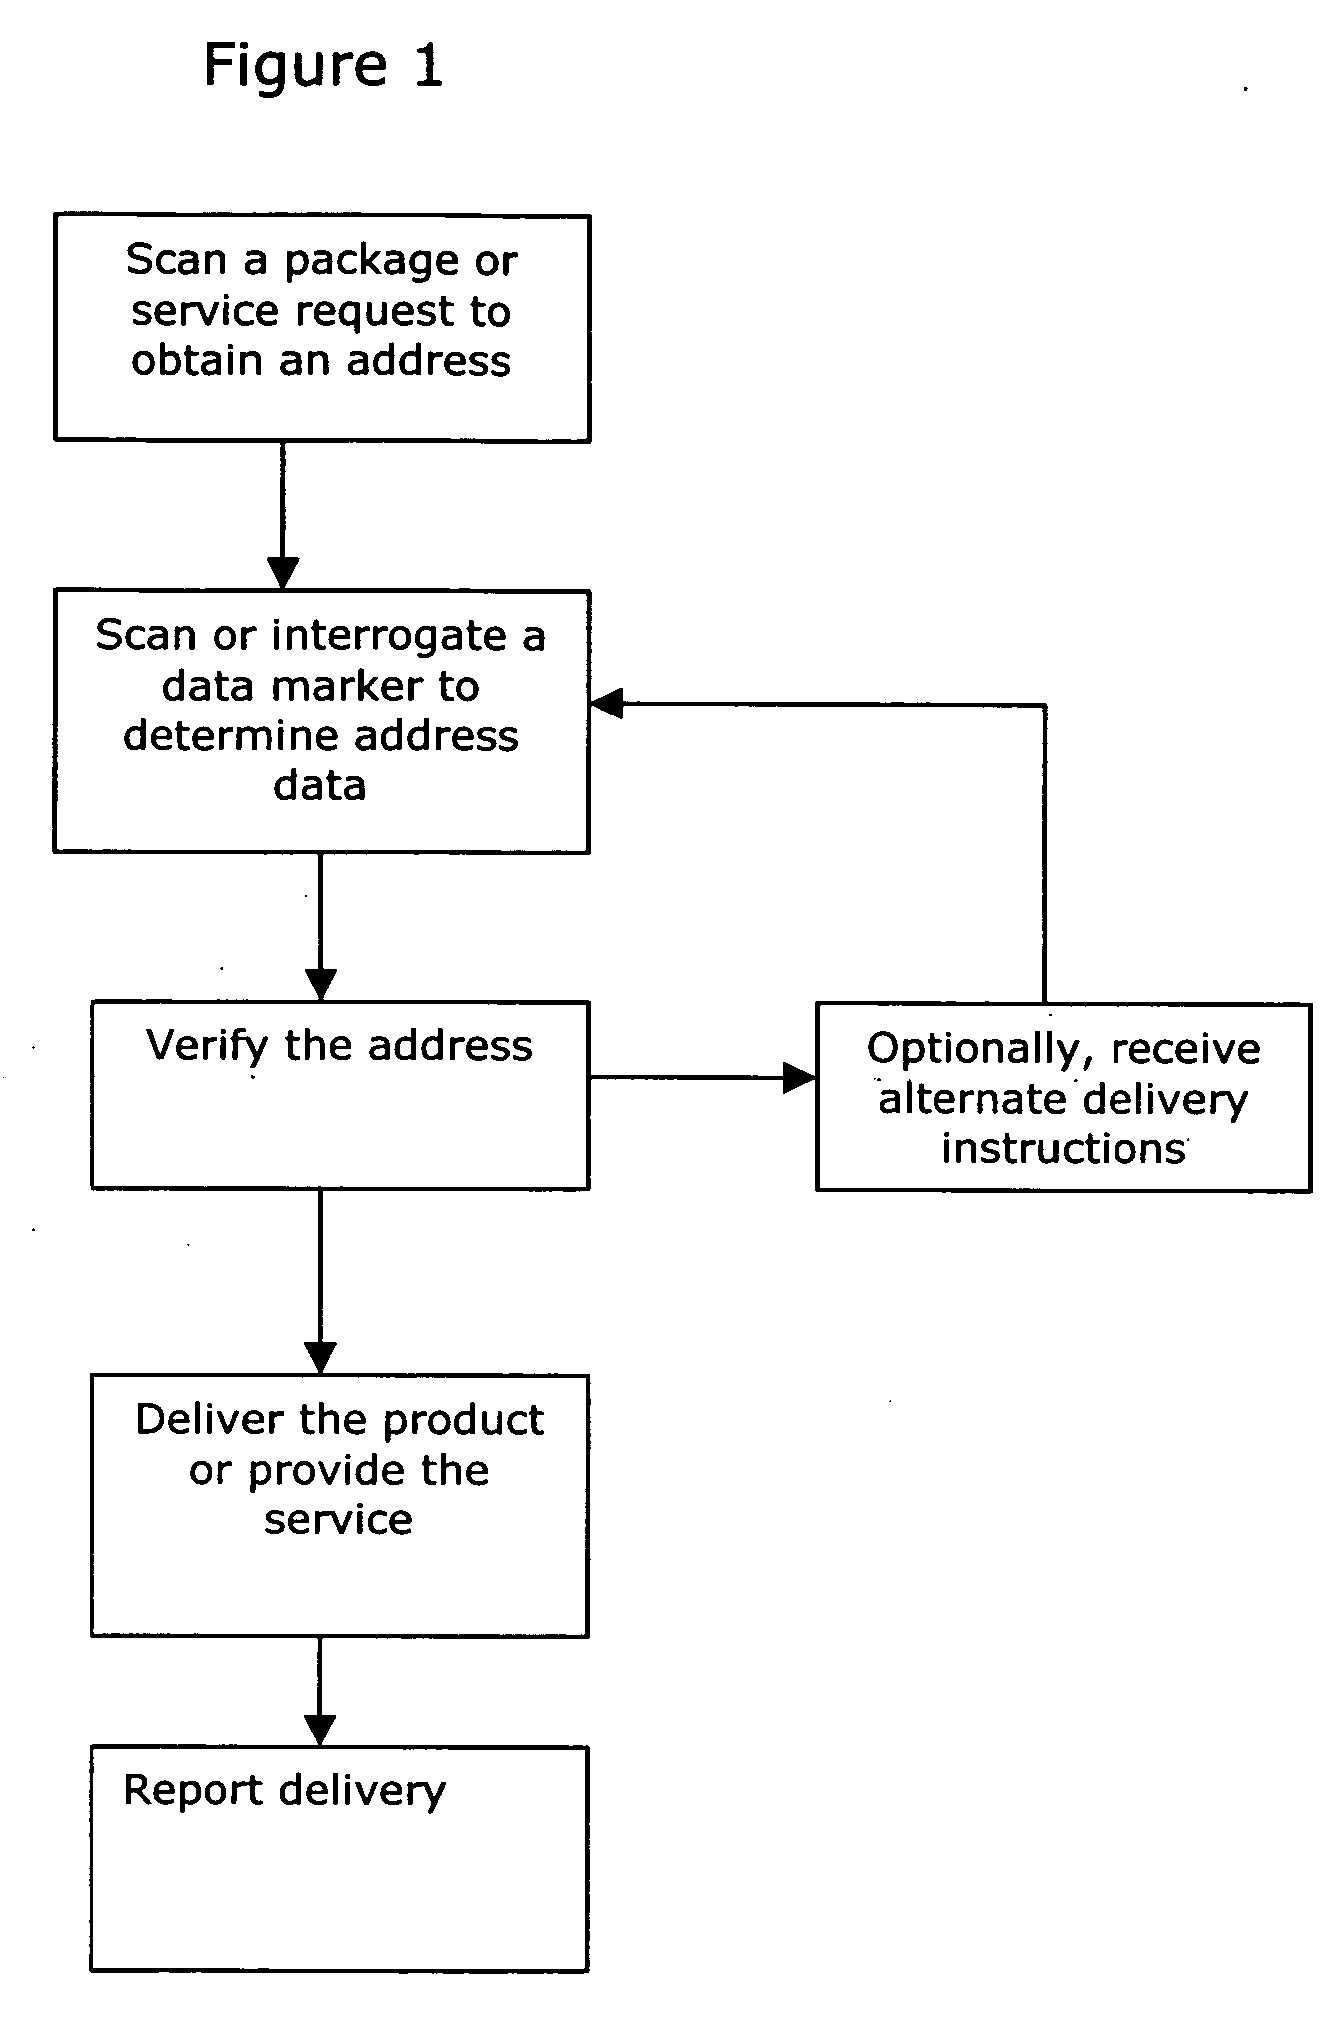 Method to verify or track a physical address while providing a service